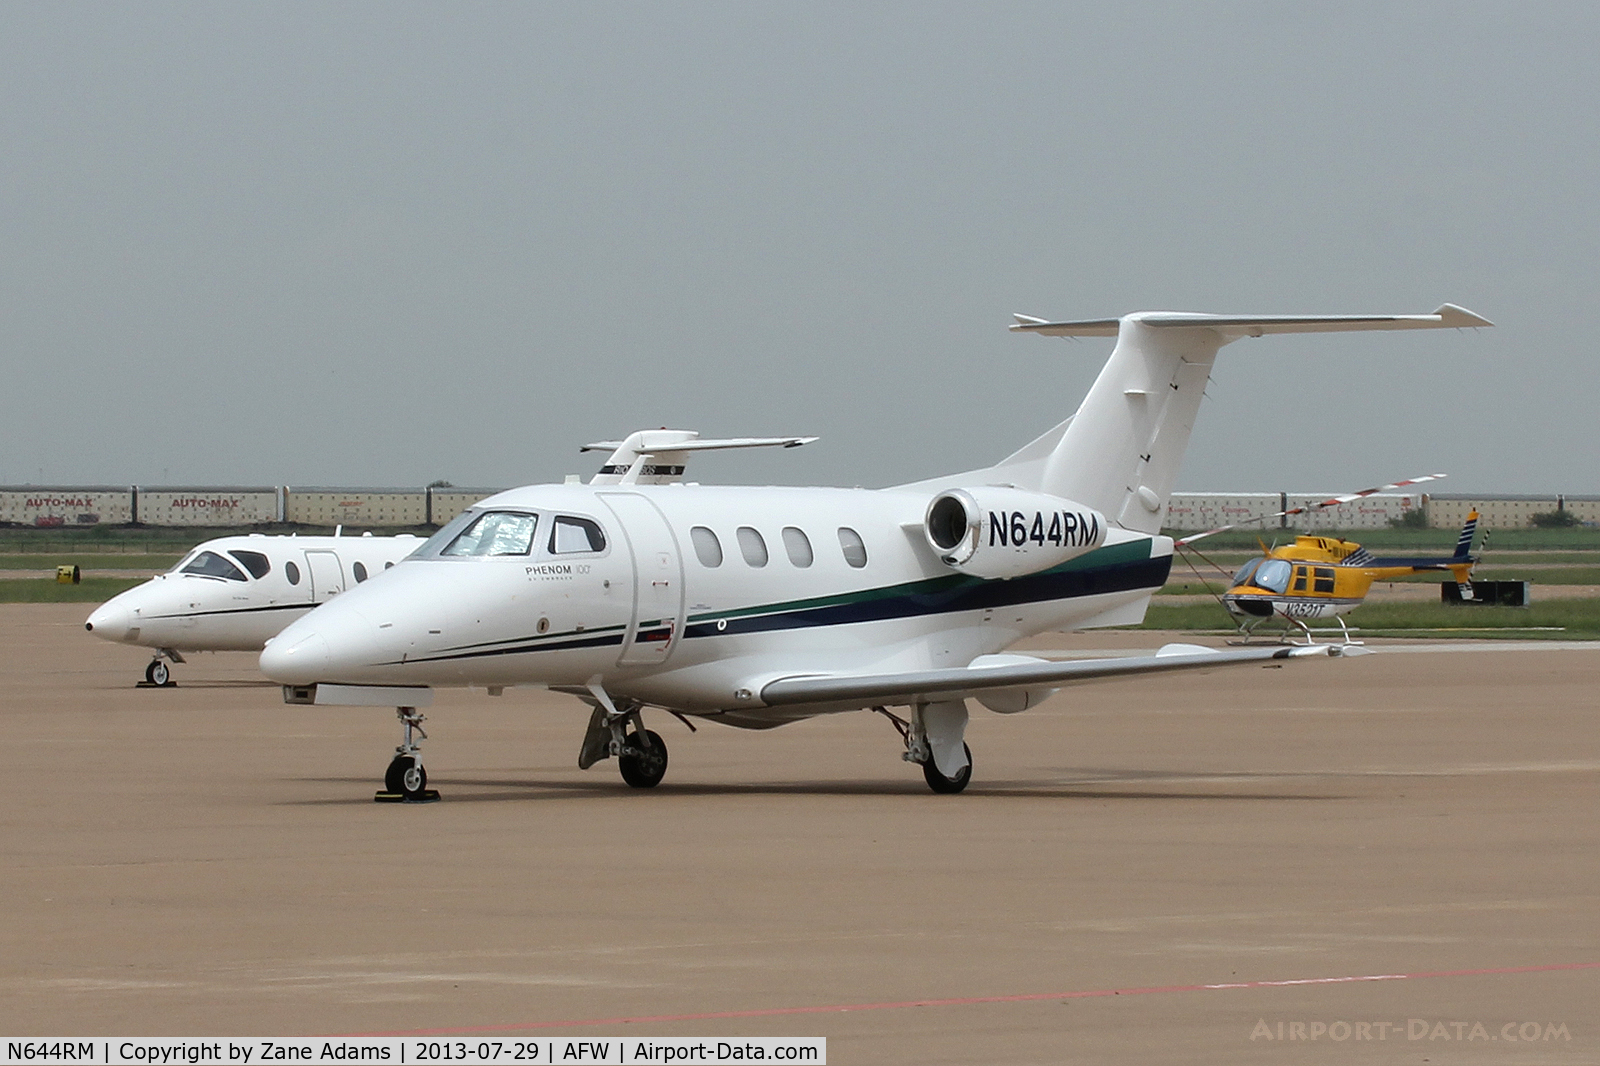 N644RM, 2009 Embraer EMB-500 Phenom 100 C/N 50000061, At Alliance Airport - Ft. Worth, TX